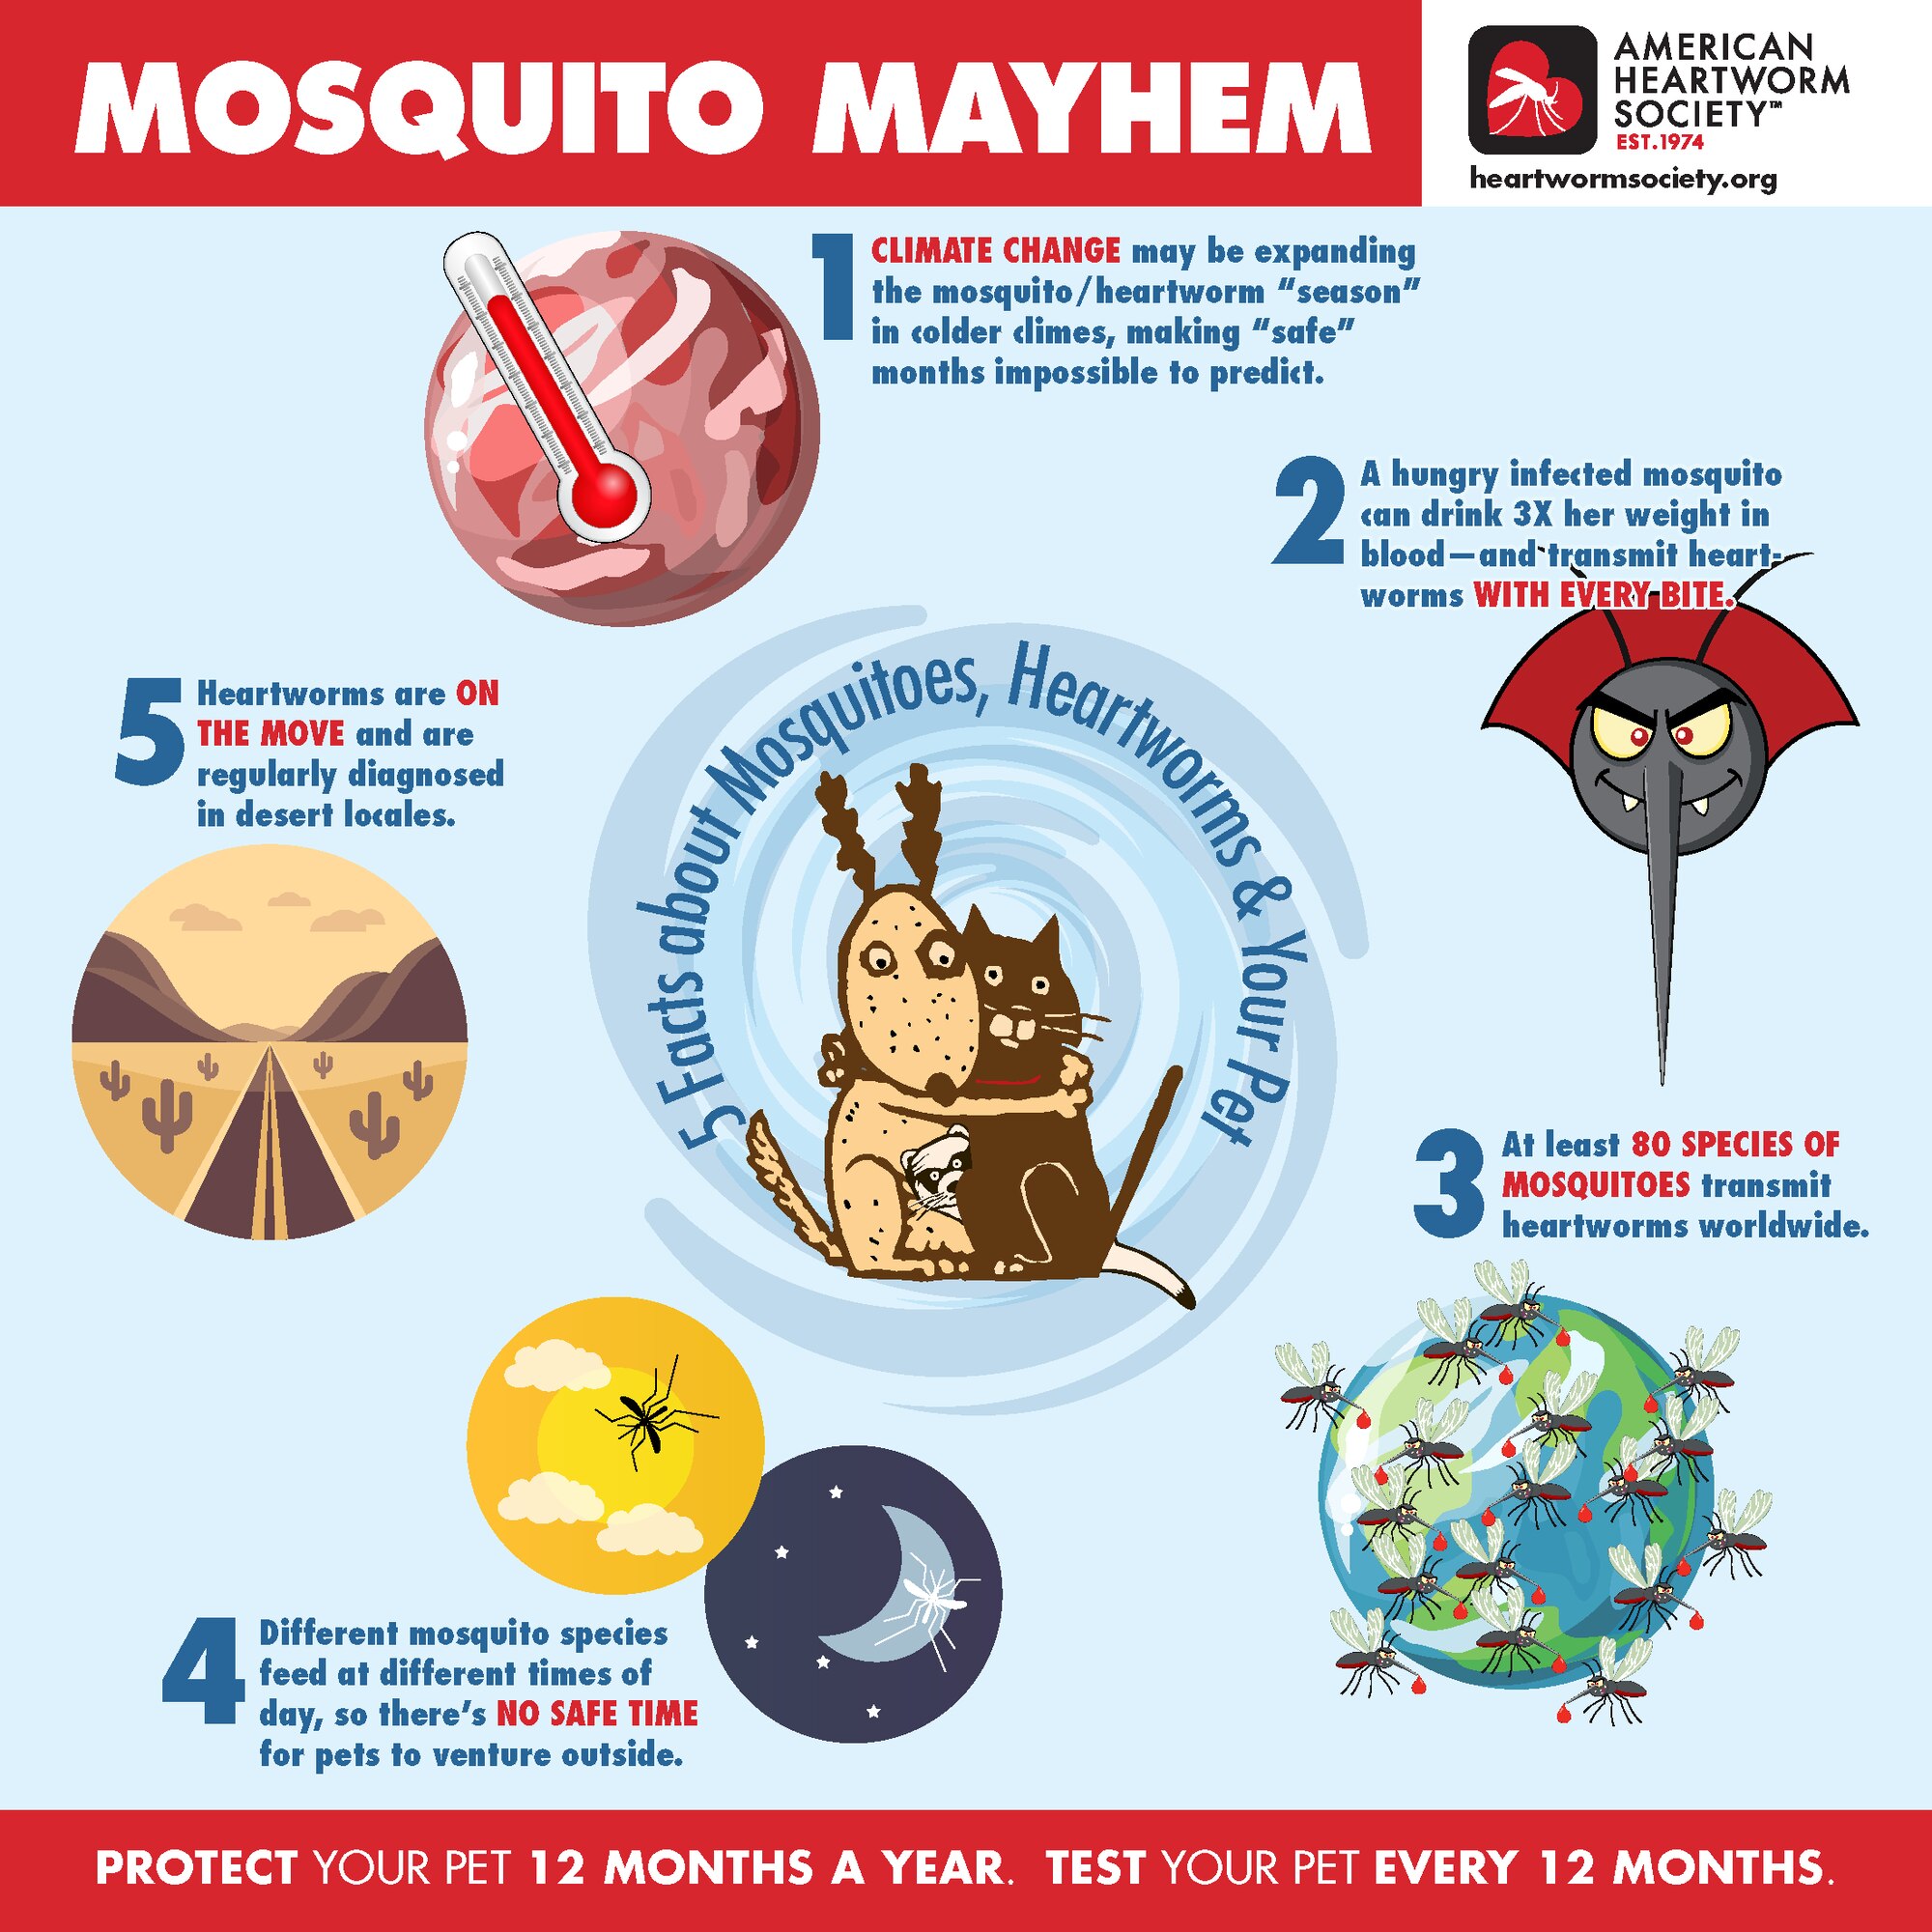 Poster showing animal illustrations and five facts about mosquitoes and heartworms.